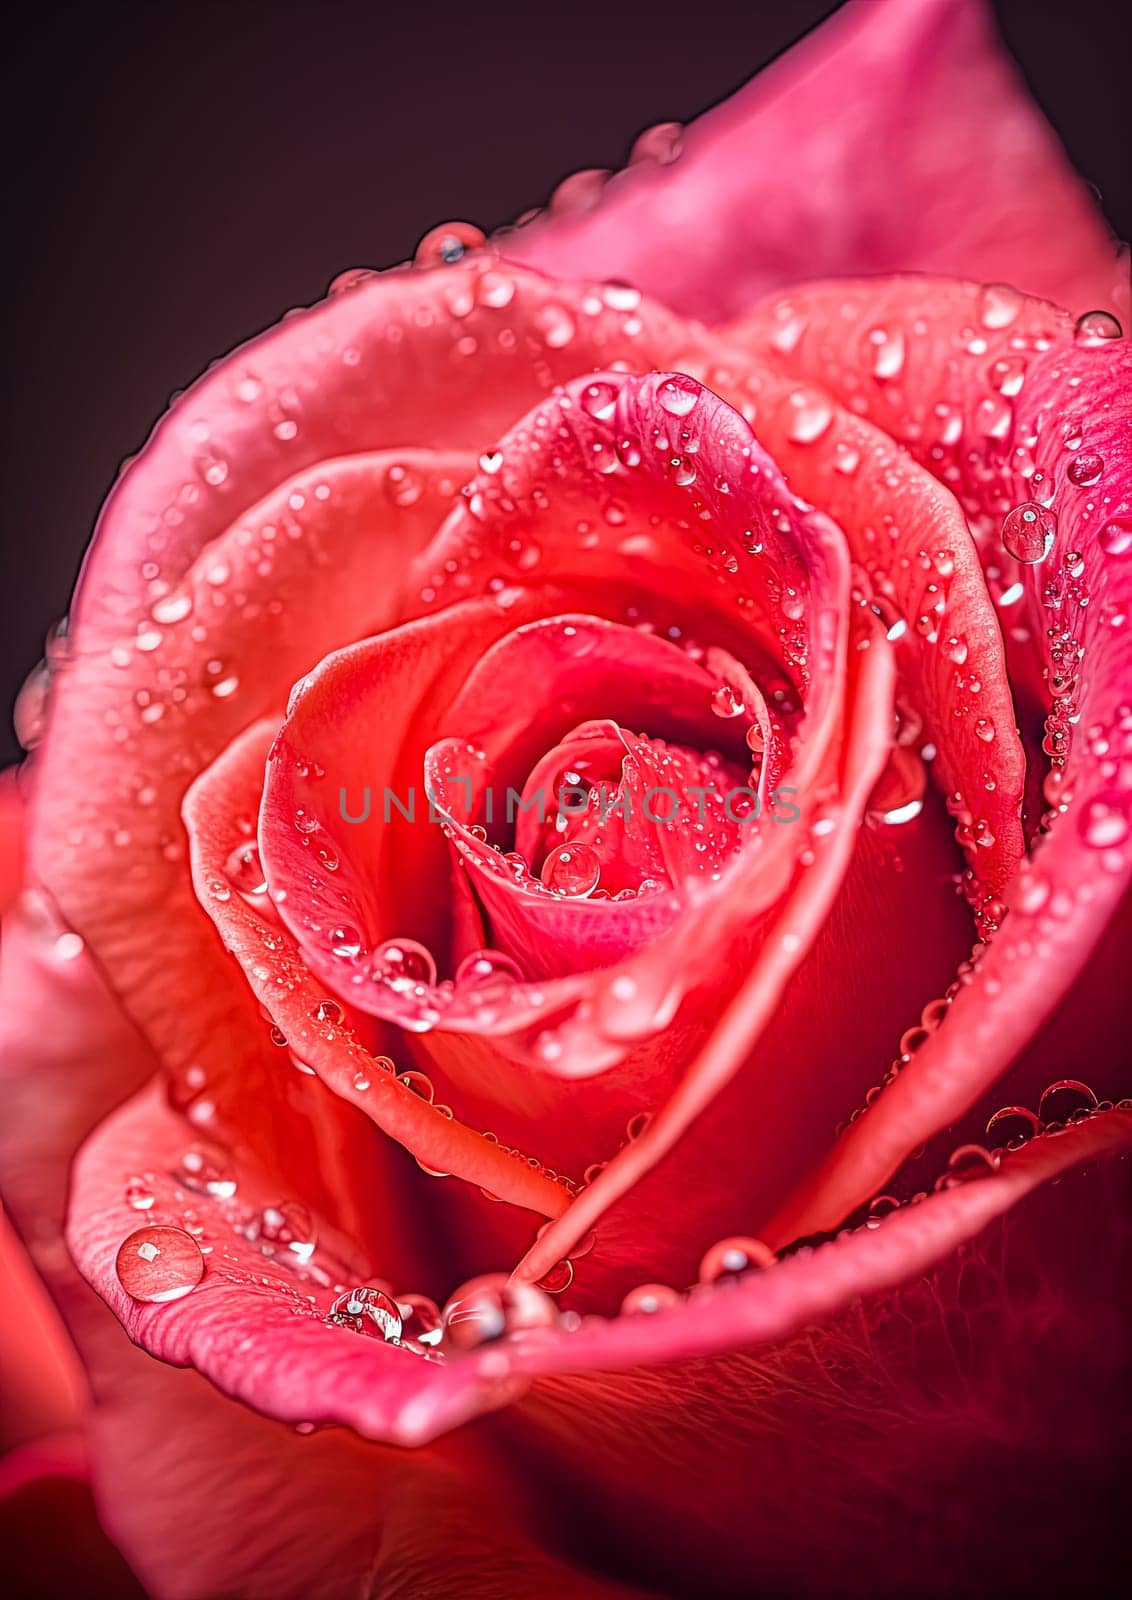 A close up of a red rose with water droplets on it. The droplets give the rose a fresh and vibrant appearance by Alla_Morozova93